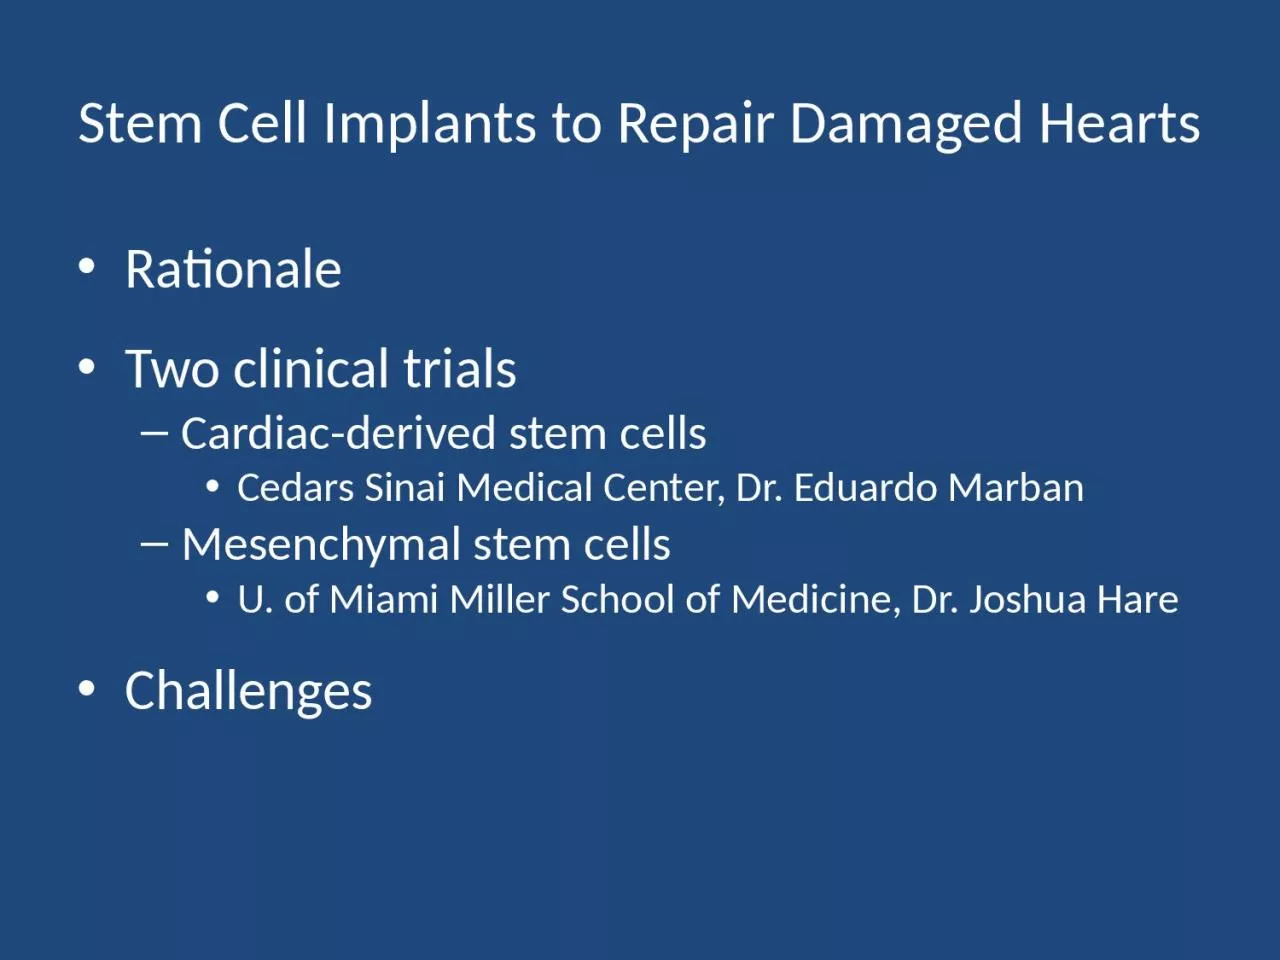 Stem Cell Implants to Repair Damaged Hearts